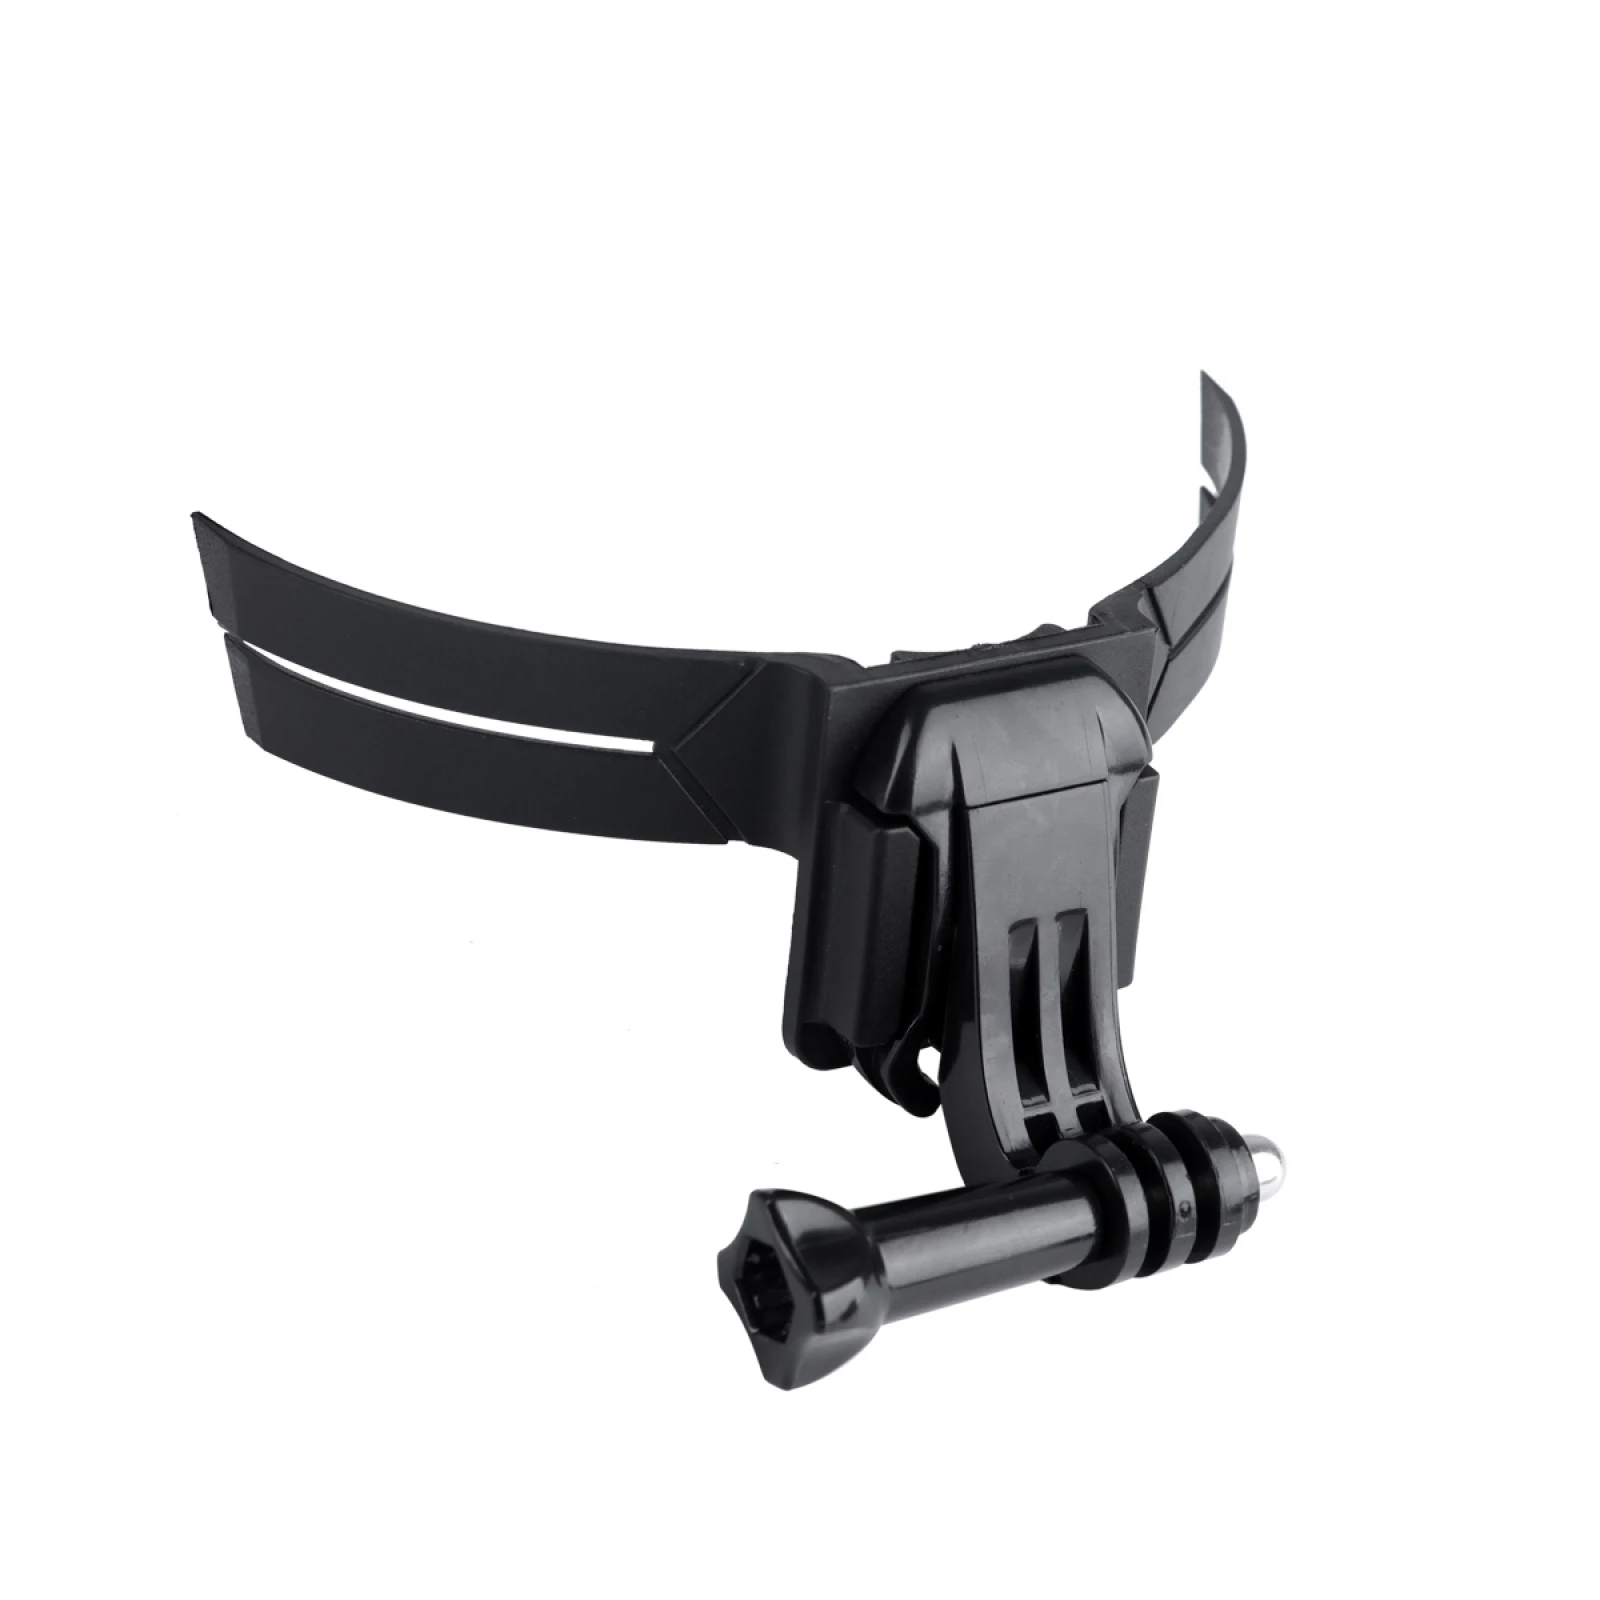 

Helmet Mount with J-Hook for HERO10 HERO9 HERO8 Black 7 6 5 4 3 / DJI Osmo Action / Xiaoyi and Other Action Cameras